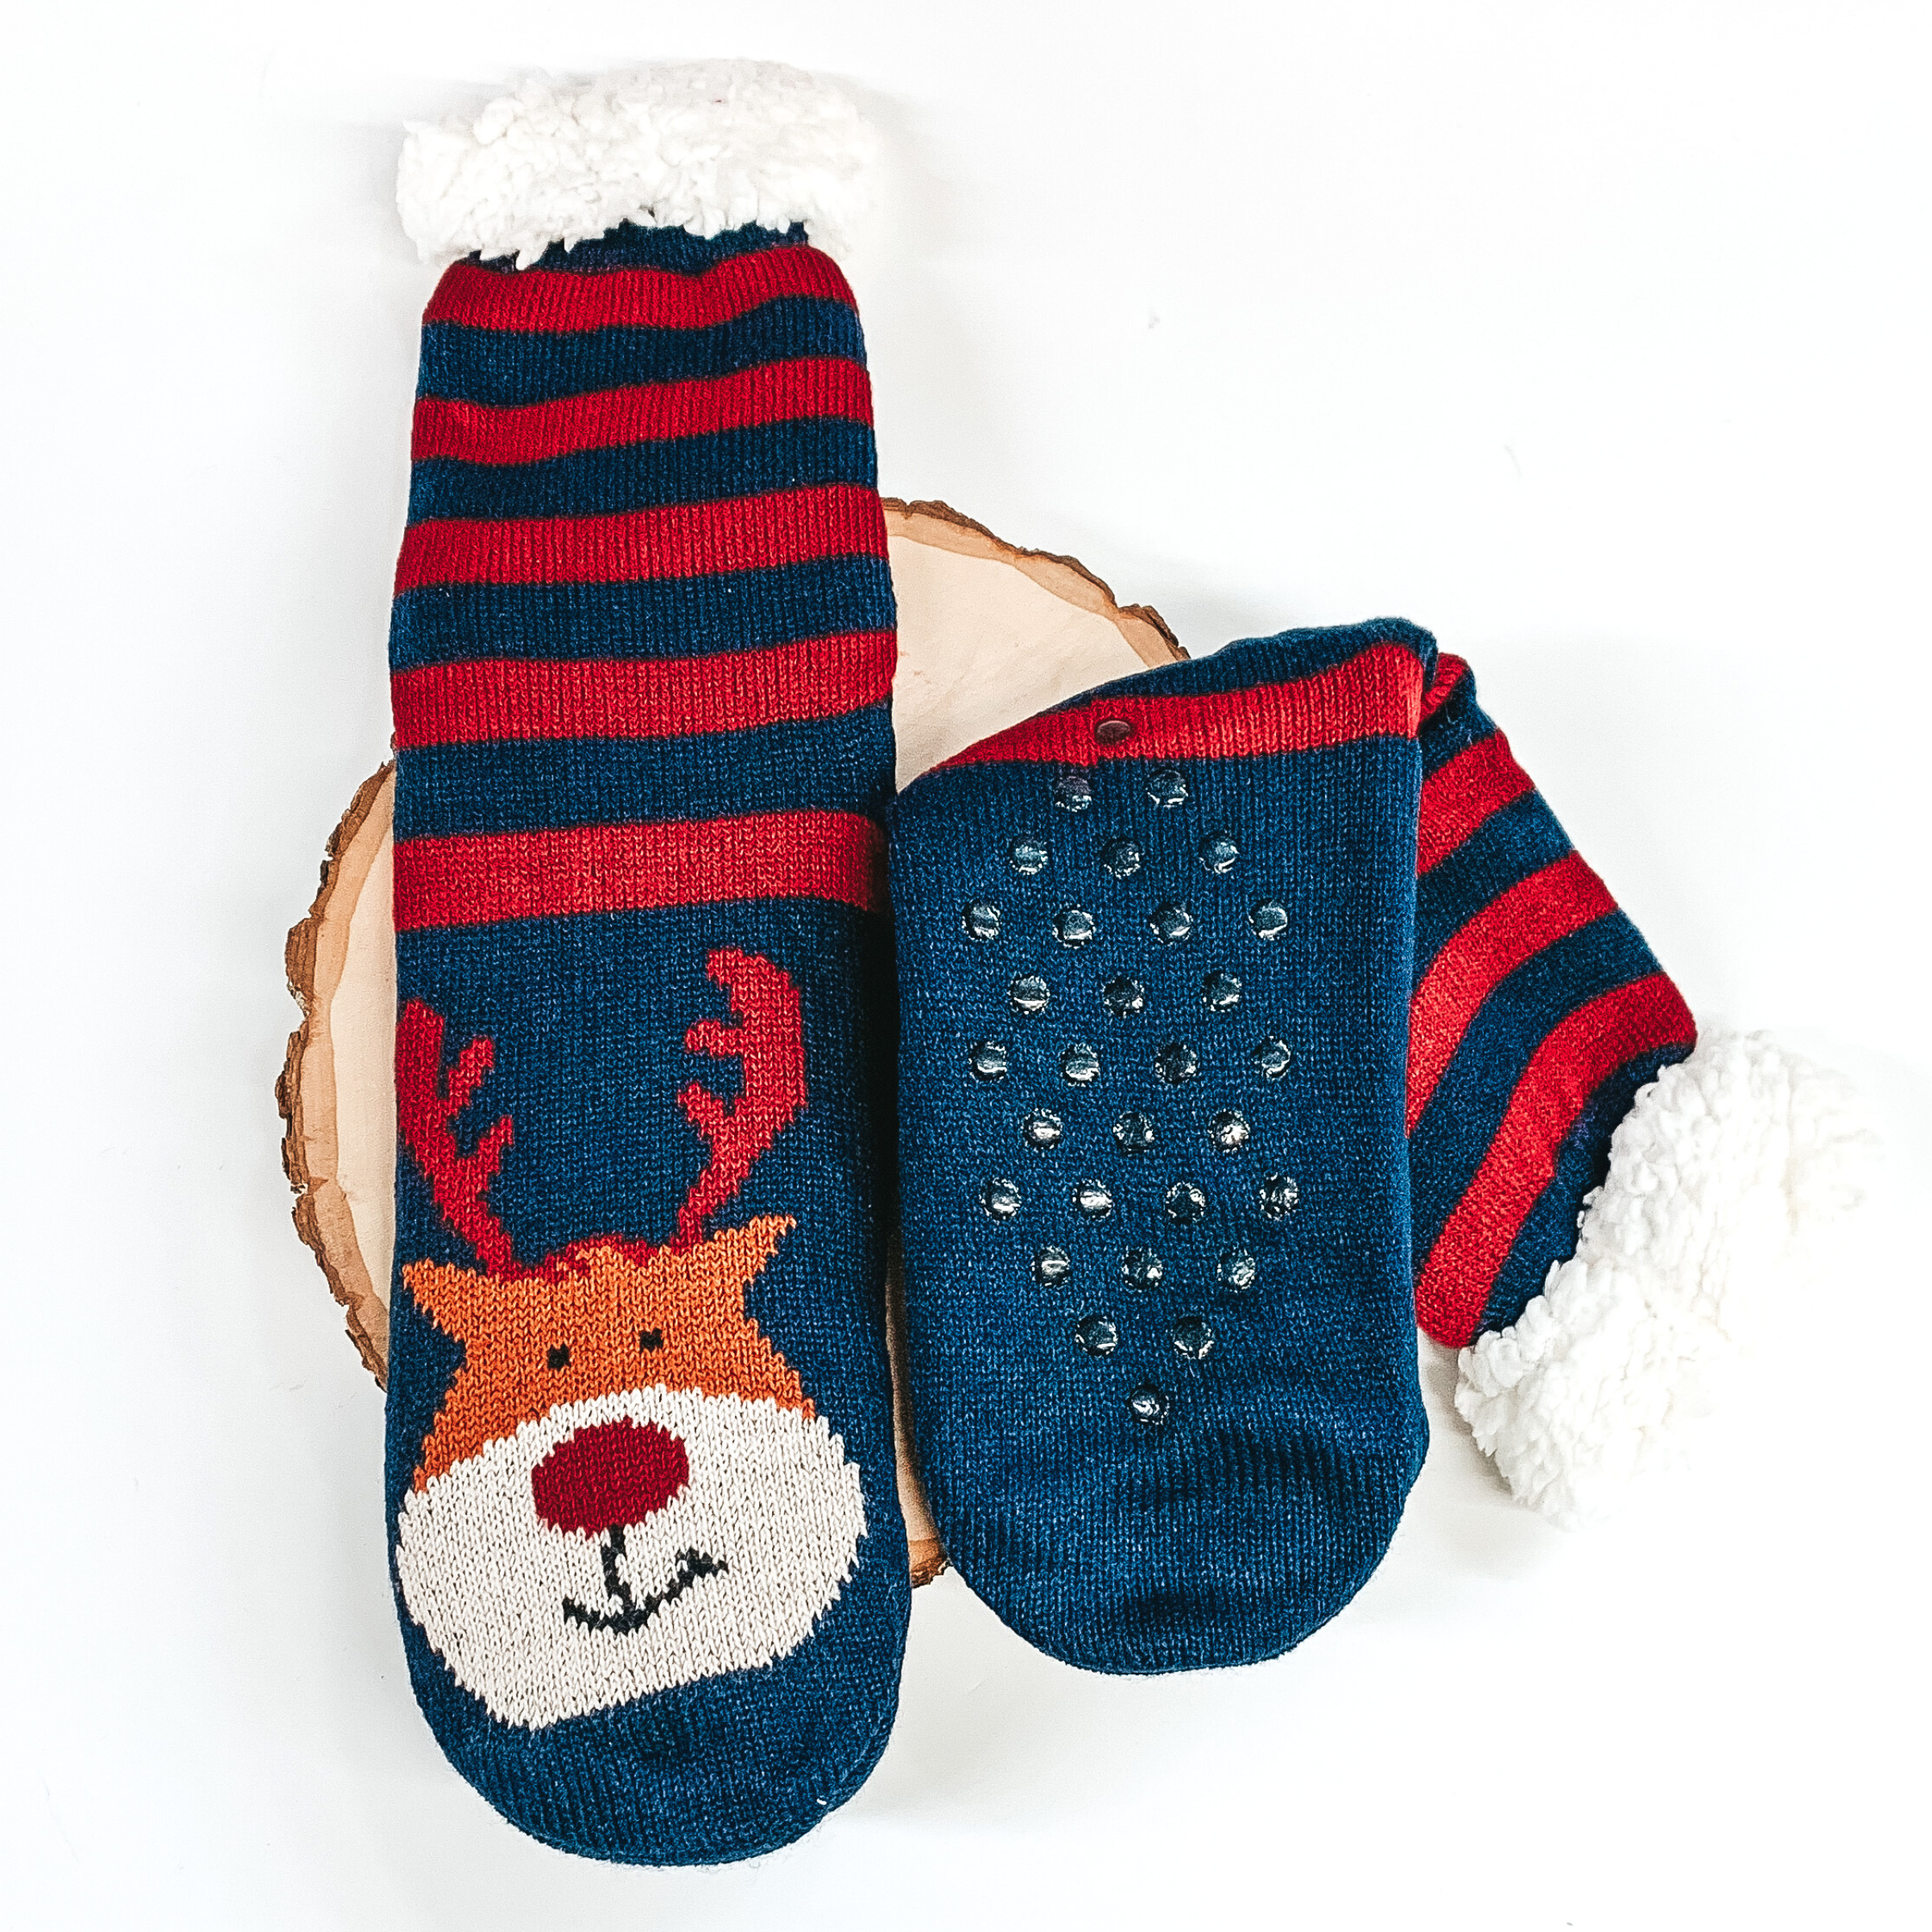 Navy socks that has Rudolph's face with red antlers towards the bottom of the socks. These socks also have stripes on the ankle parts, has rubber grips on the bottom, and white fluff on the top of the socks. These socks are pictured laying on a piece of wood on a white background.